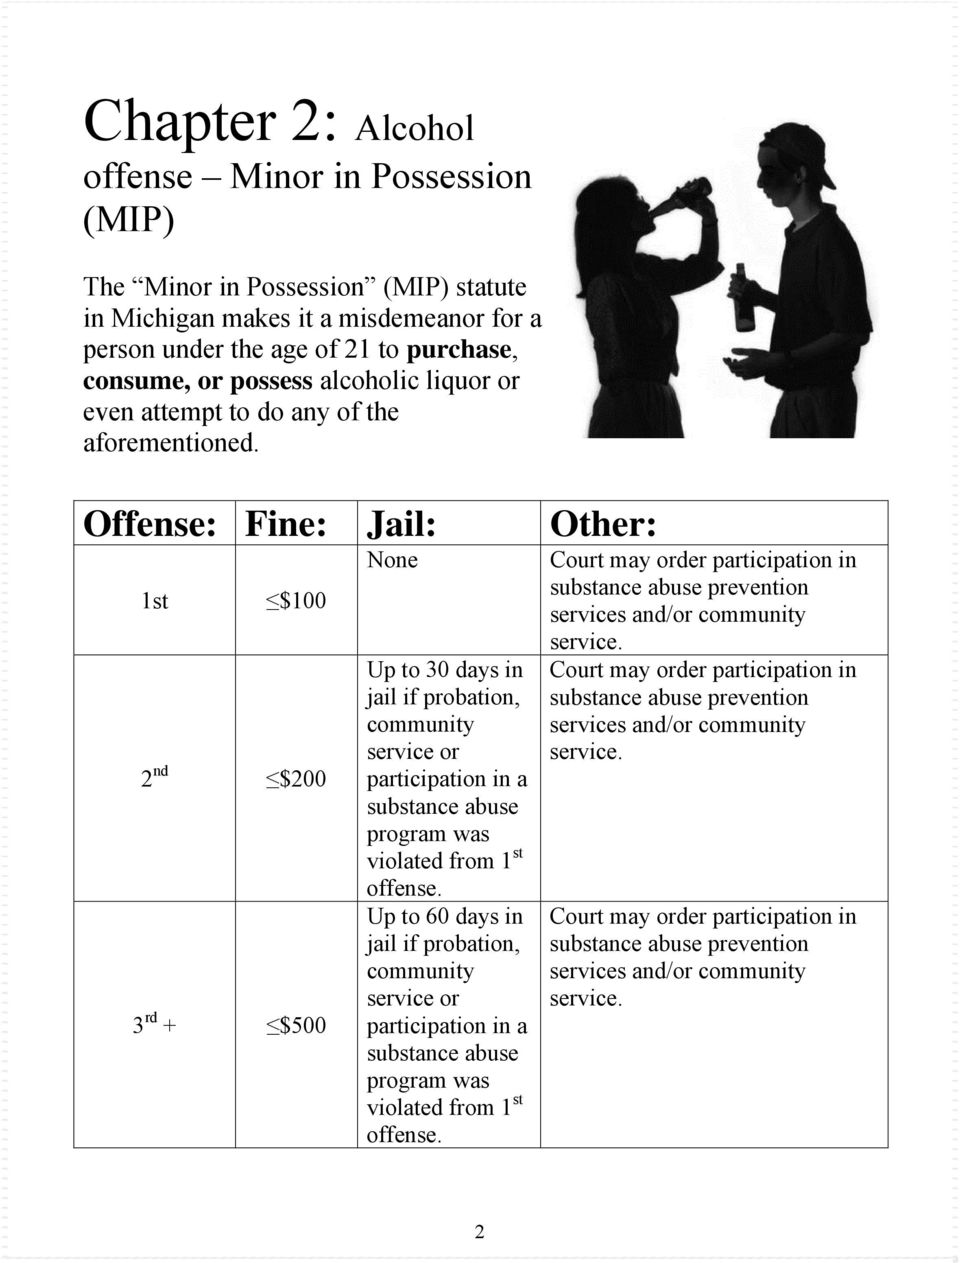 Offense: Fine: Jail: Other: 1st $100 2 nd $200 3 rd + $500 None Up to 30 days in jail if probation, community service or participation in a program was violated from 1 st offense.